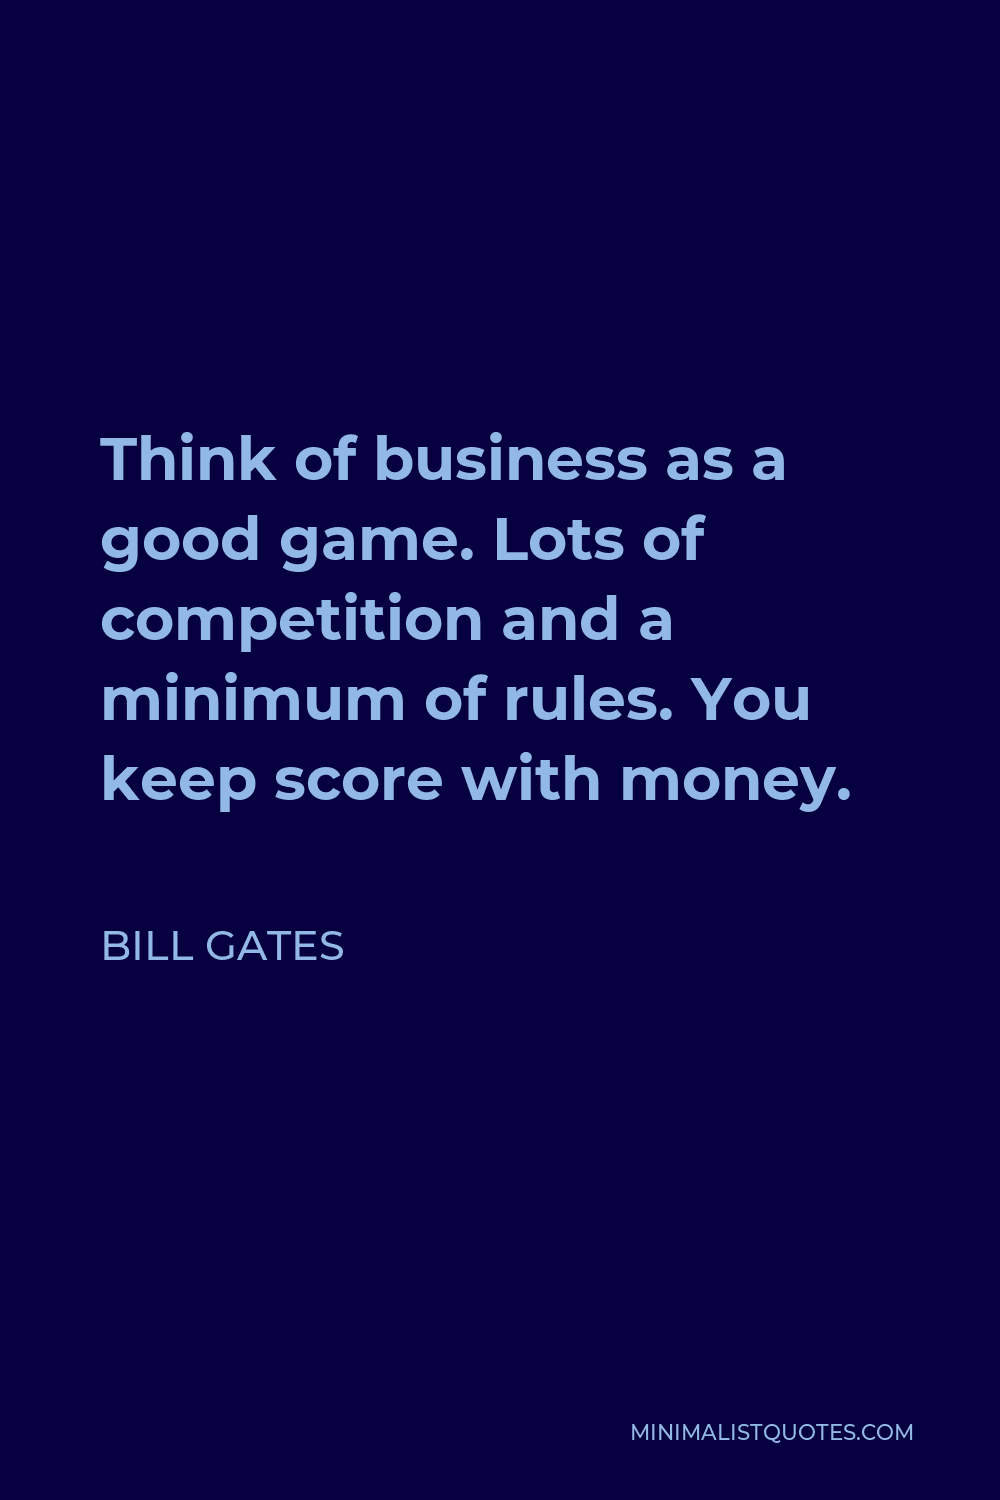 Bill Gates Quote - Think of business as a good game. Lots of competition and a minimum of rules. You keep score with money.